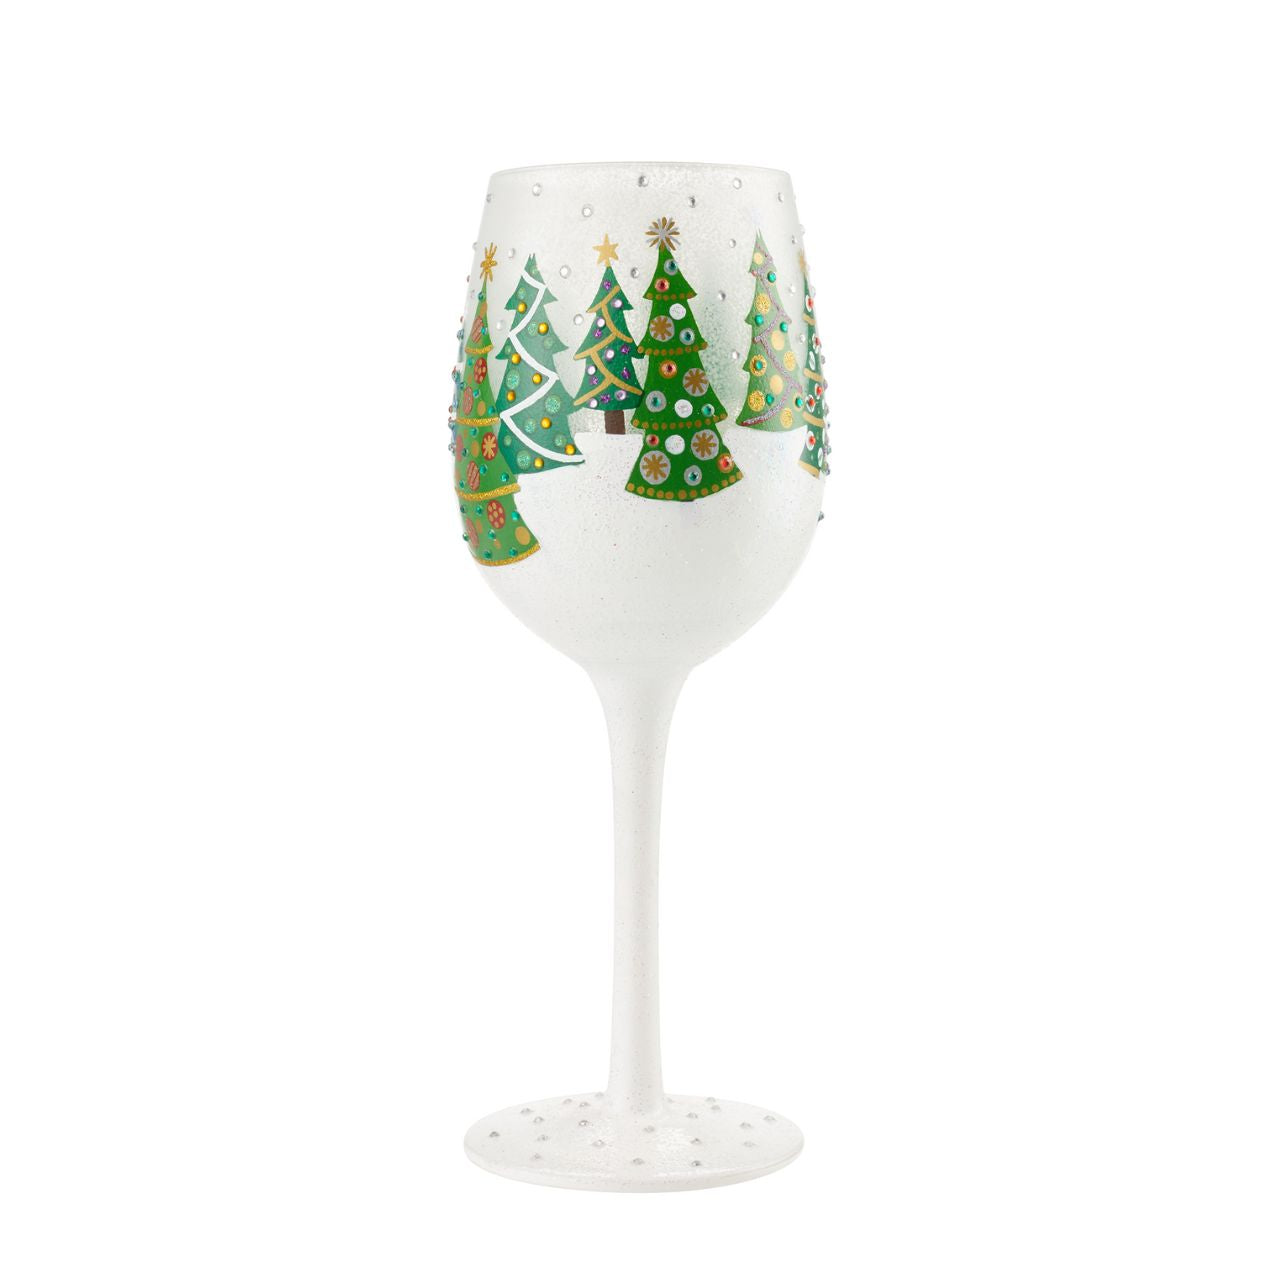 Christmas Trees in the Snow Wine Glass by Lolita  Christmas pines covered in lights and ornaments cover this winter wonderland wine glass. With textured snow and glittering accents, this wine glass is ready for wassail and snowflakes.